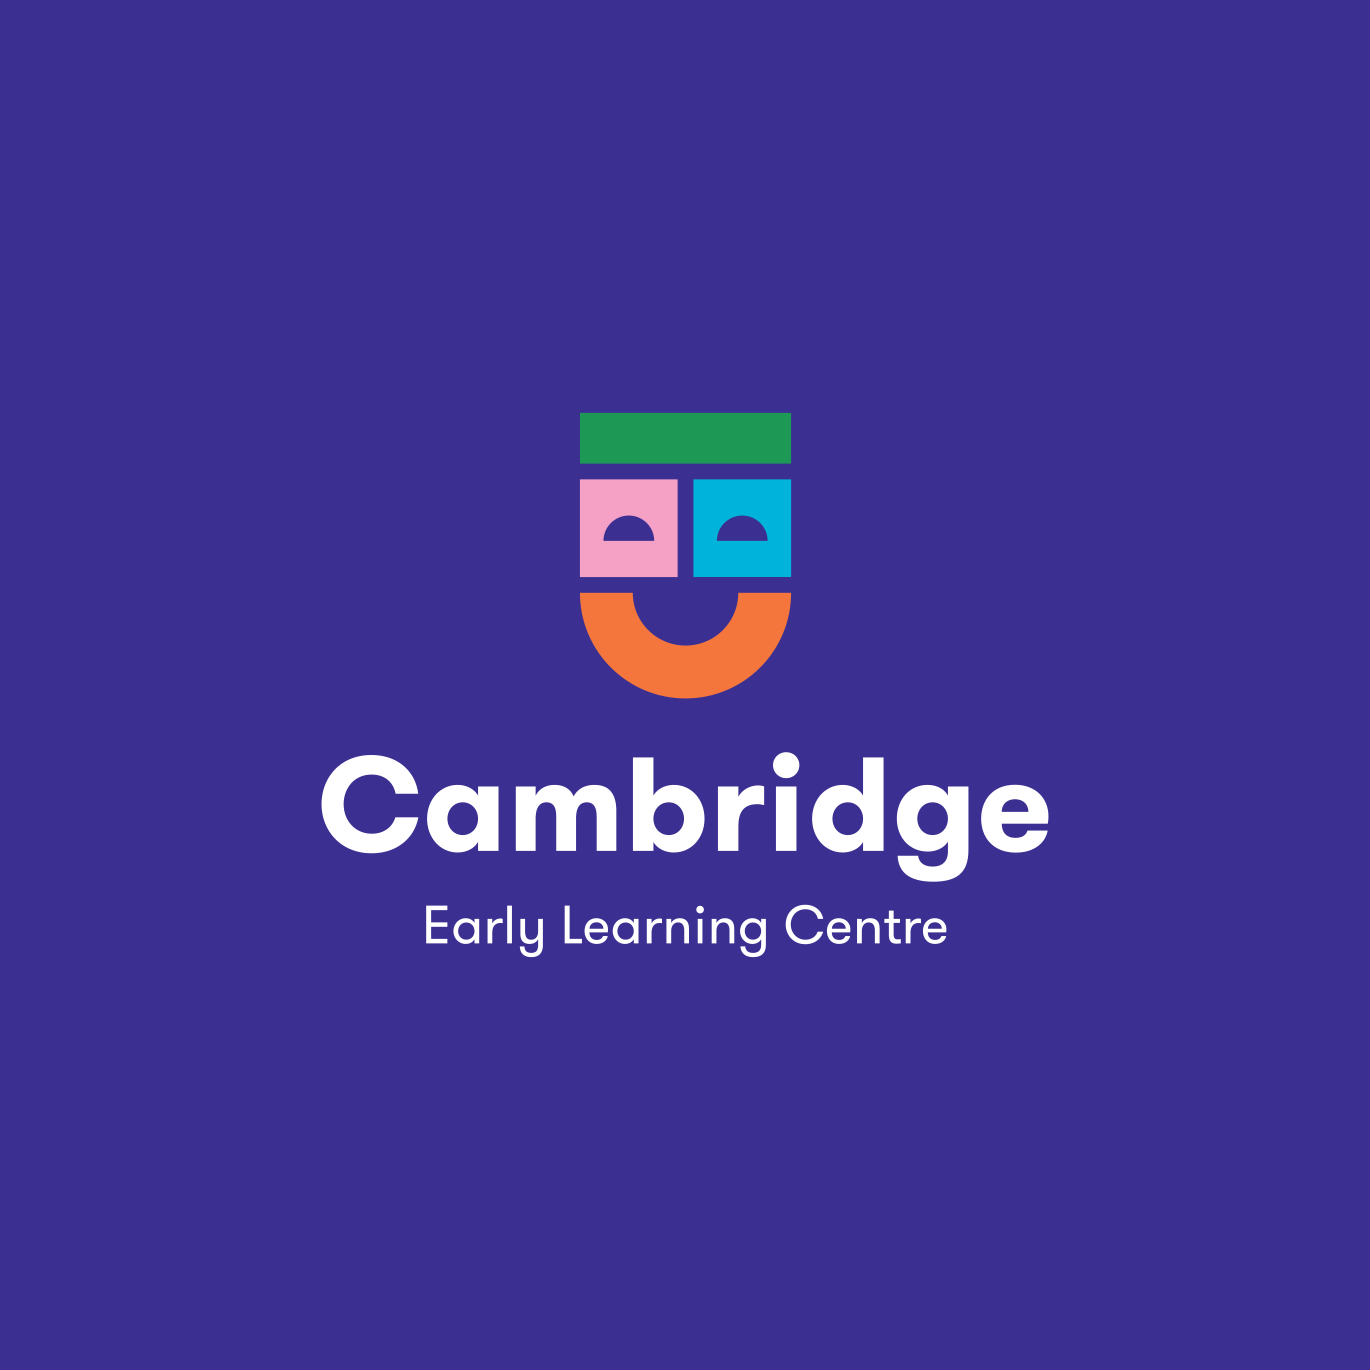 Cambridge Early Learning Centre Branding